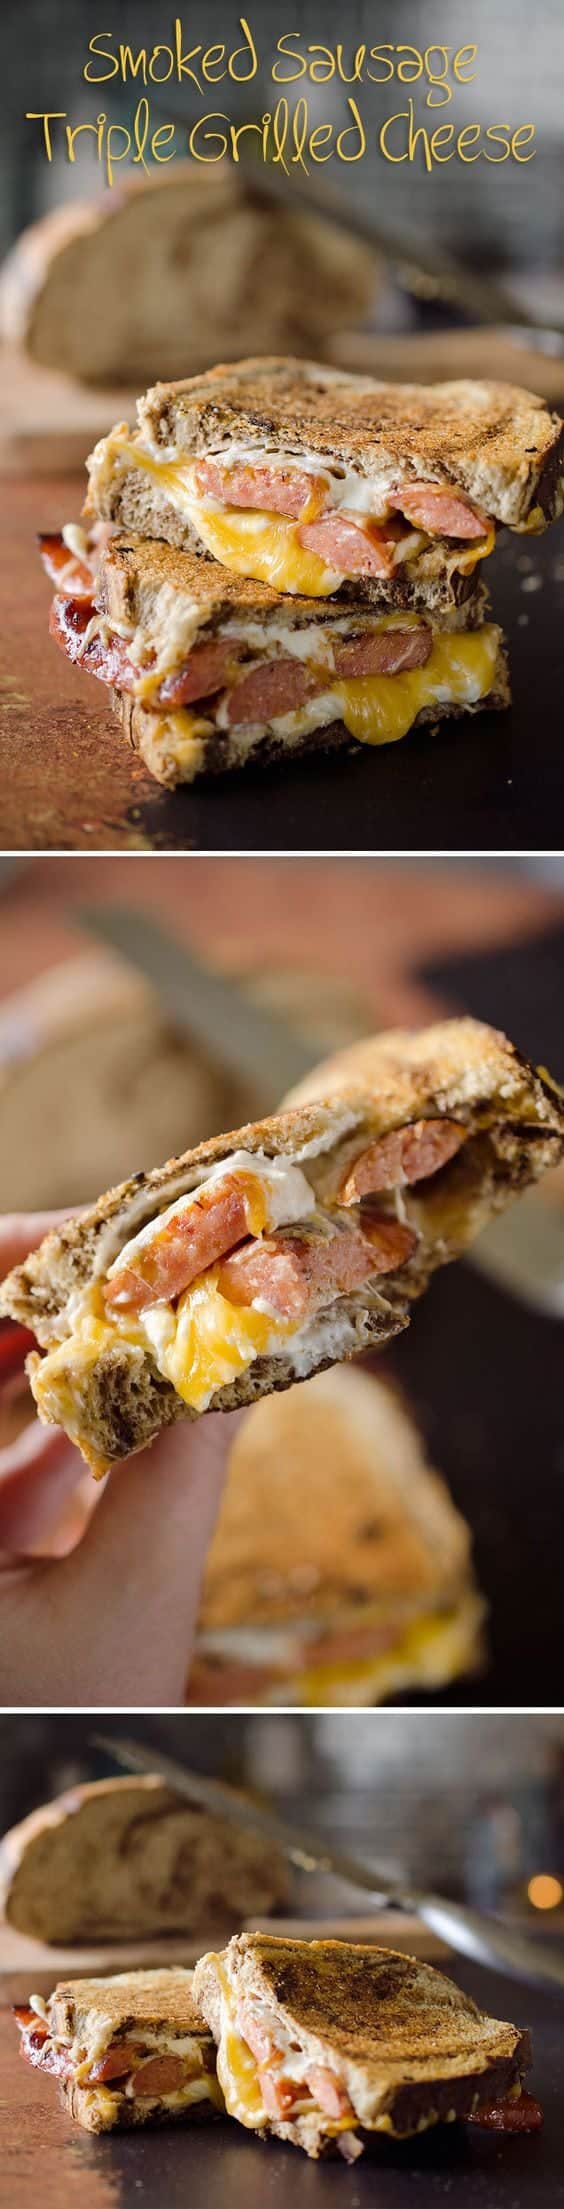 Smoked Sausage Triple Grilled Cheese